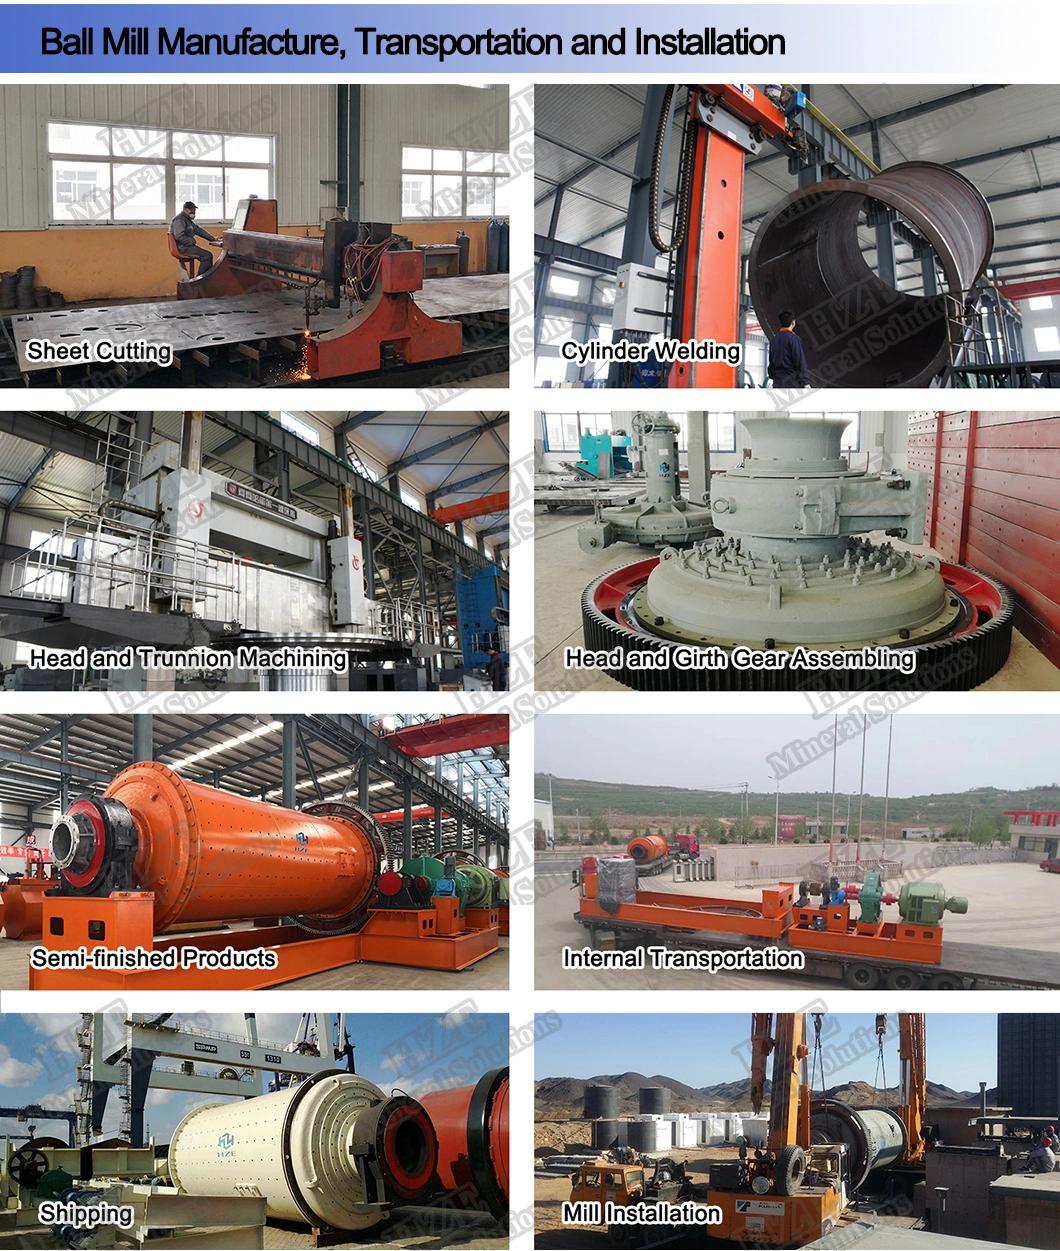 Small Scale Gold Mining Equipment Grate Ball Mill of Processing Plant